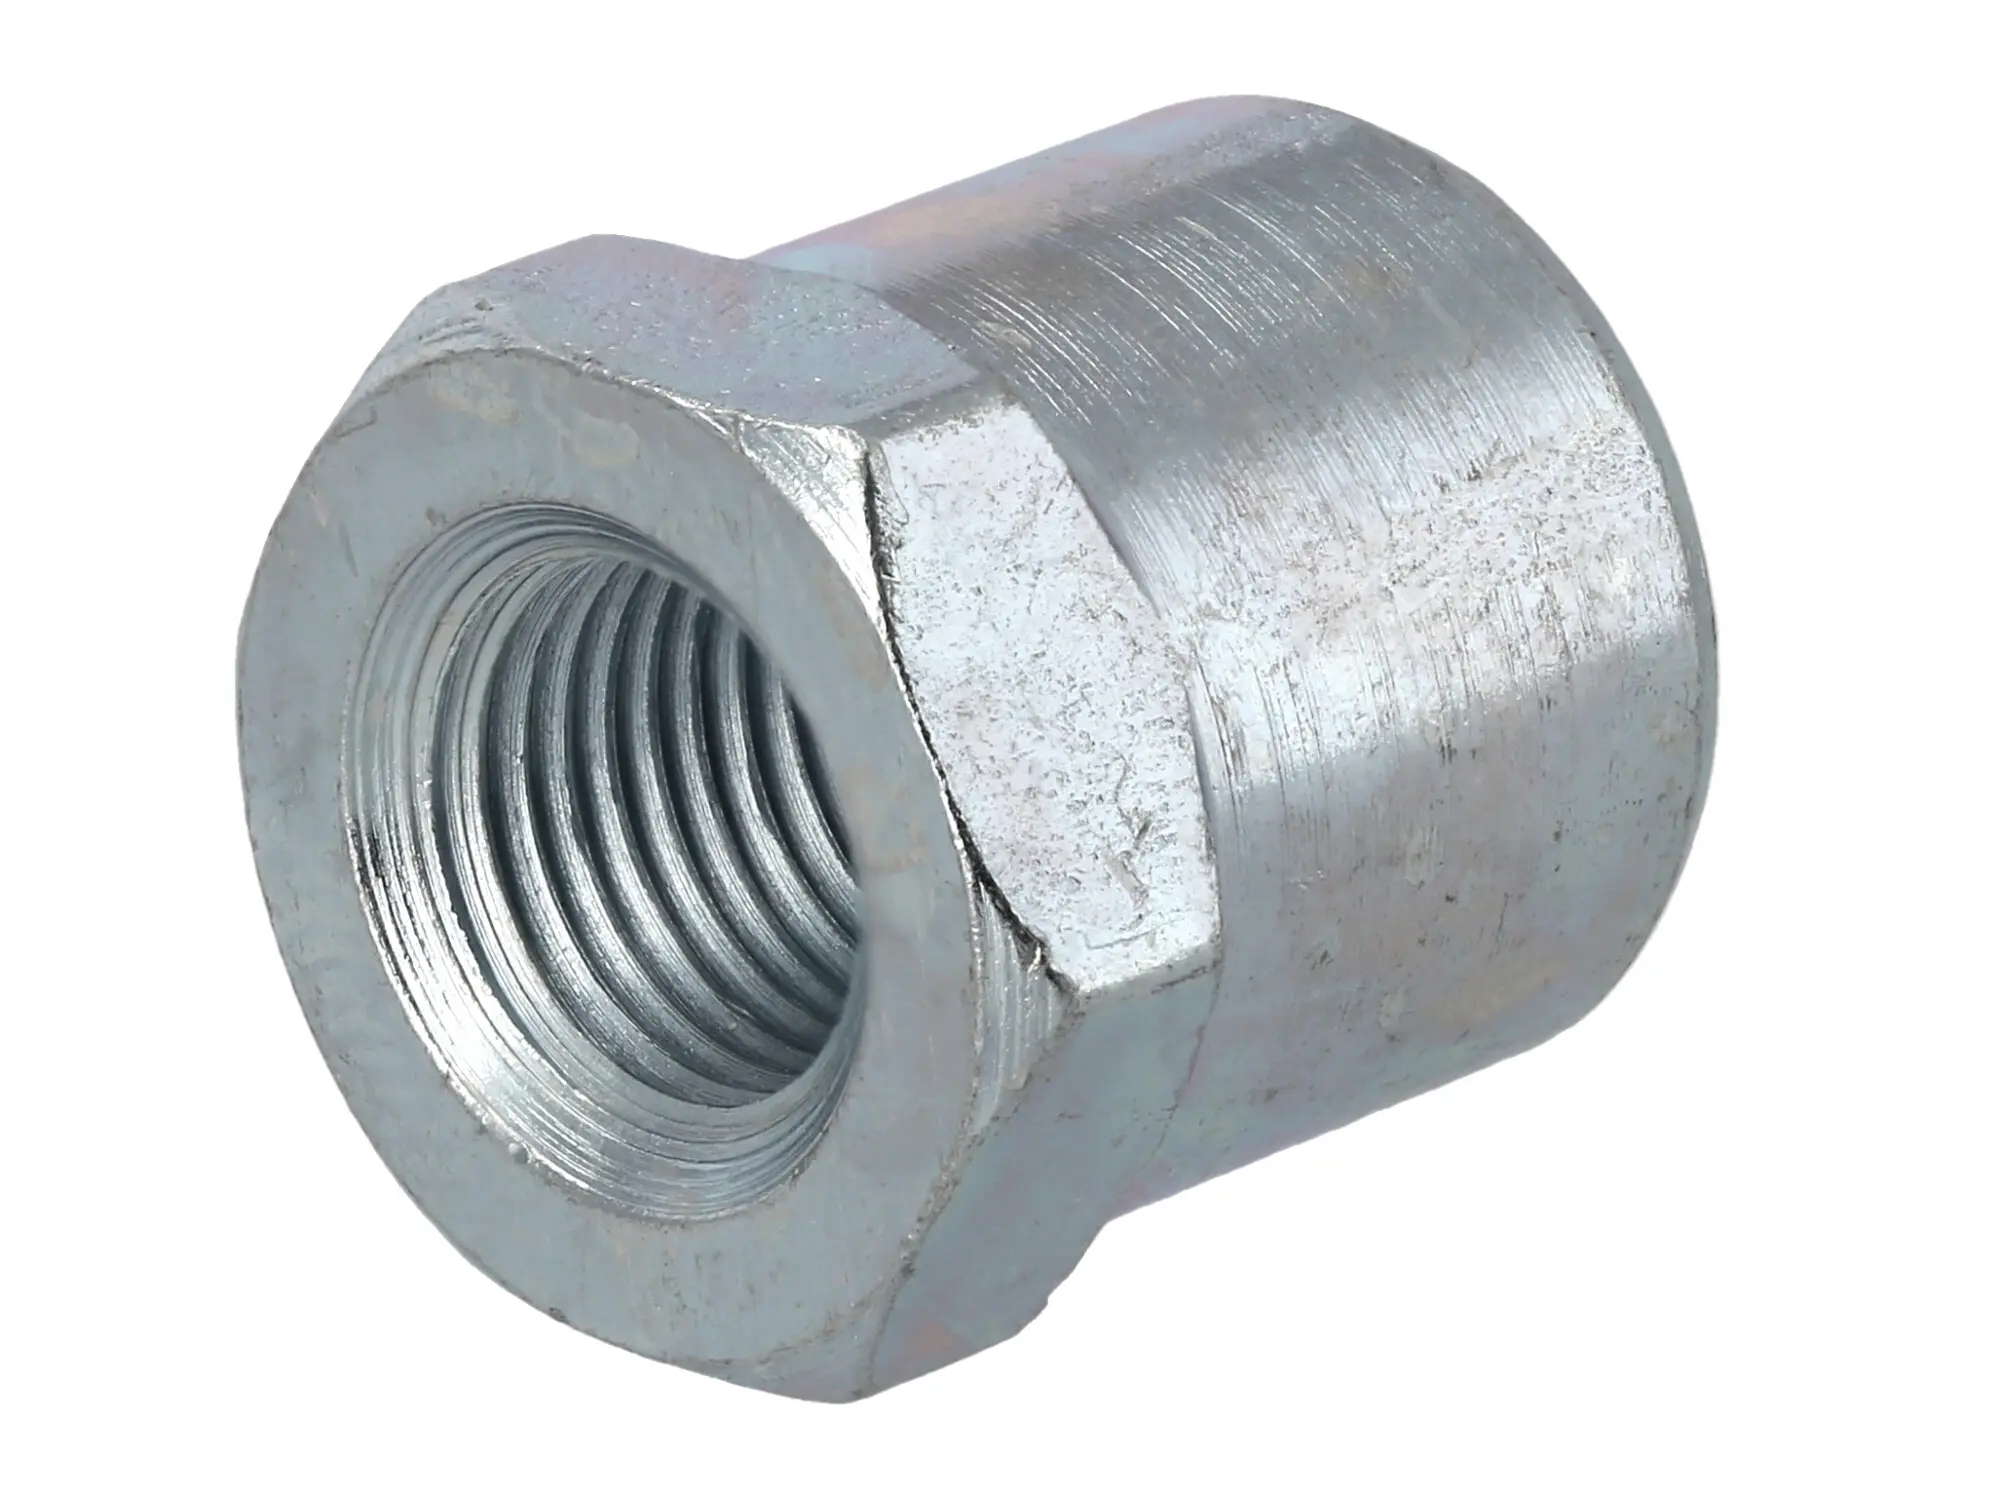 Hexagon nut for pole wheel M10x1,0 height 18mm, Item no: 10075714 - Image 1